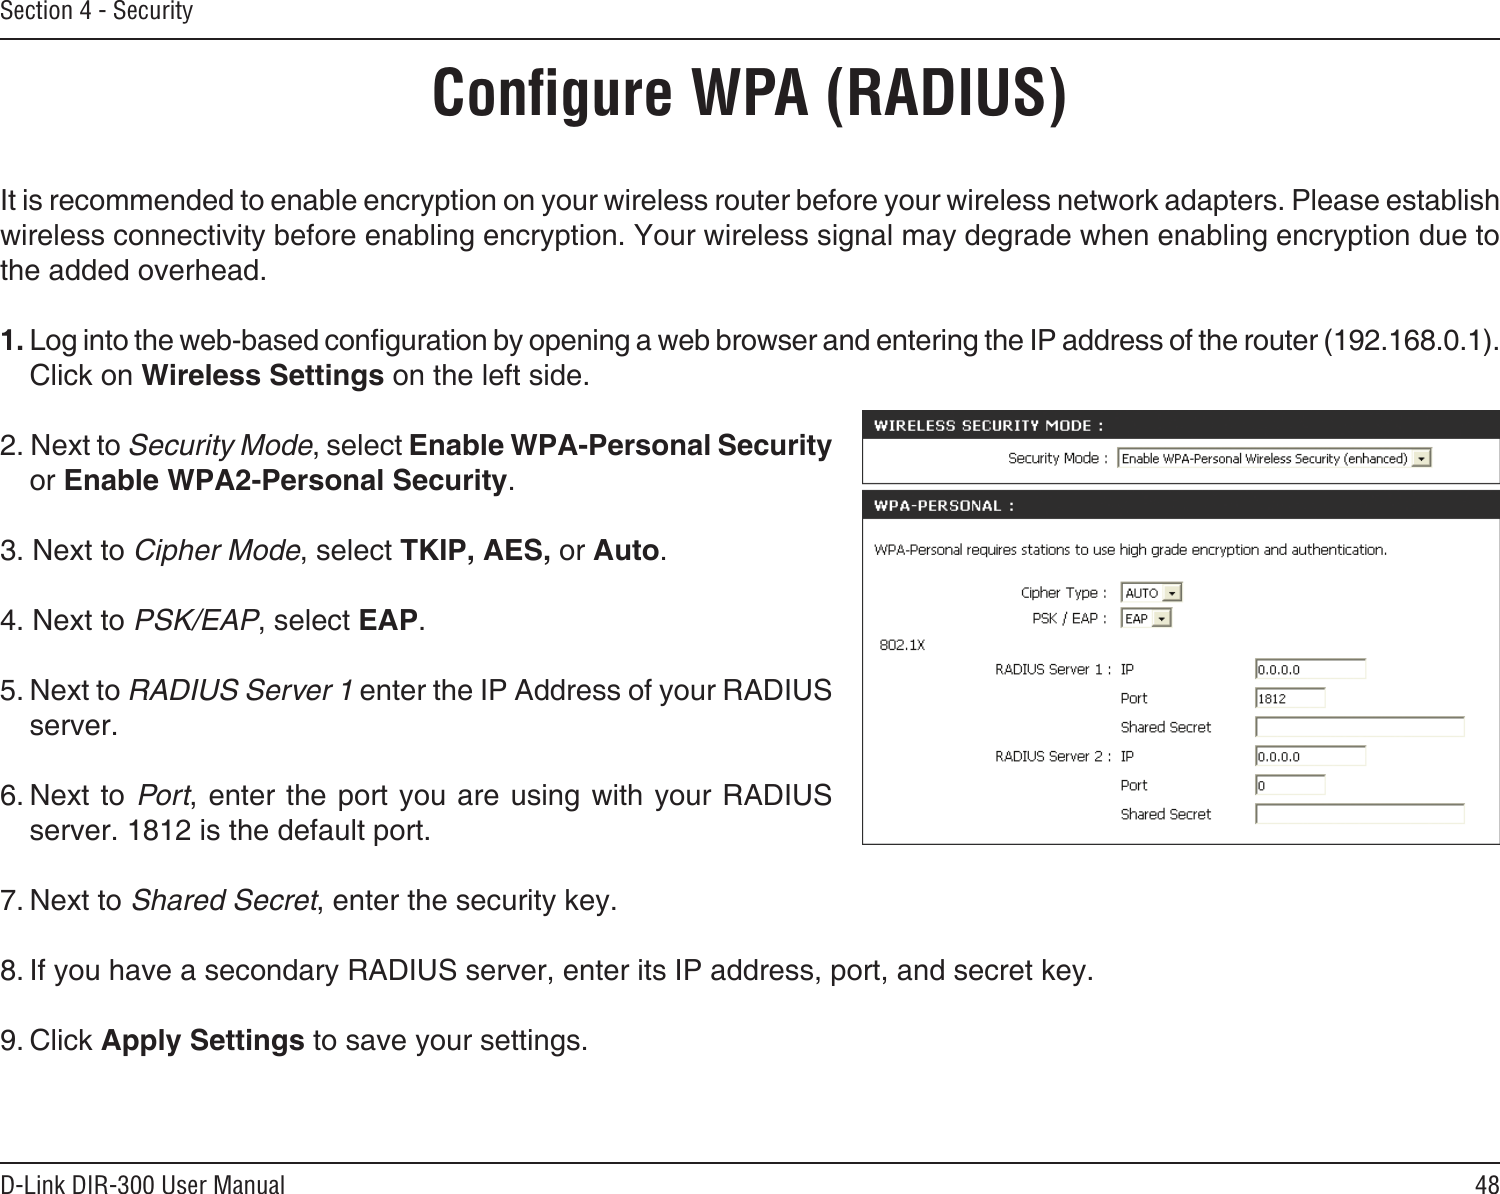 48D-Link DIR-300 User ManualSection 4 - SecurityConﬁgure WPA (RADIUS)It is recommended to enable encryption on your wireless router before your wireless network adapters. Please establish wireless connectivity before enabling encryption. Your wireless signal may degrade when enabling encryption due to the added overhead.1. Log into the web-based conguration by opening a web browser and entering the IP address of the router (192.168.0.1).  Click on Wireless Settings on the left side.2. Next to Security Mode, select Enable WPA-Personal Security or Enable WPA2-Personal Security.3. Next to Cipher Mode, select TKIP, AES, or Auto.4. Next to PSK/EAP, select EAP.5. Next to RADIUS Server 1 enter the IP Address of your RADIUS server.6. Next to Port, enter  the port you are using with your RADIUS server. 1812 is the default port.7. Next to Shared Secret, enter the security key.8. If you have a secondary RADIUS server, enter its IP address, port, and secret key.9. Click Apply Settings to save your settings.